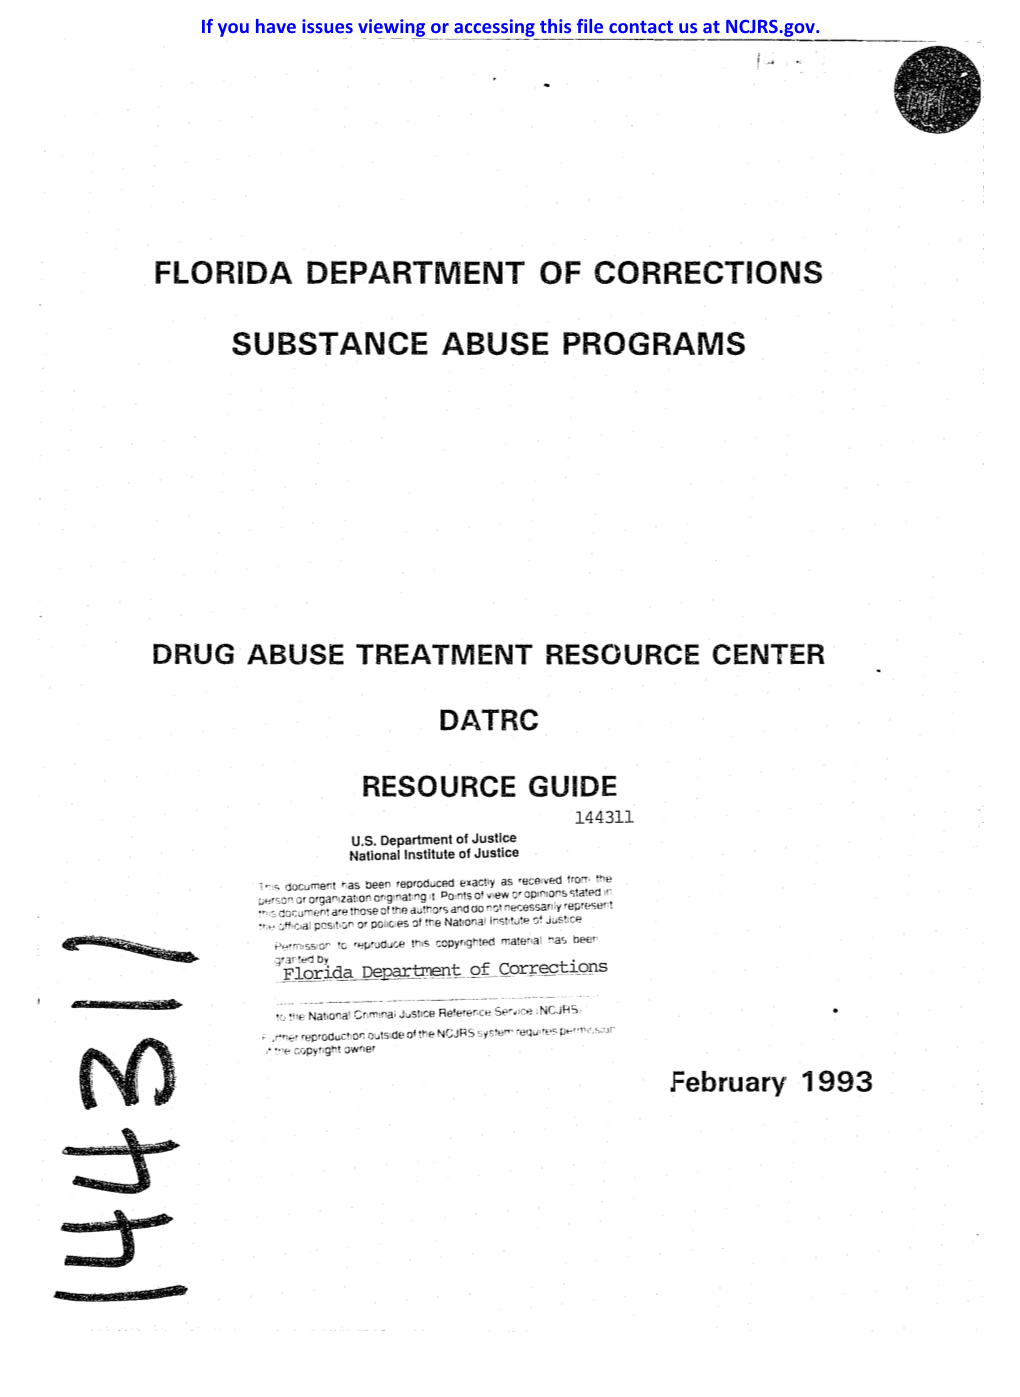 Florida Department of Corrections Substance Abuse Programs Drug Abuse Treatment Resource Center (Datrc)